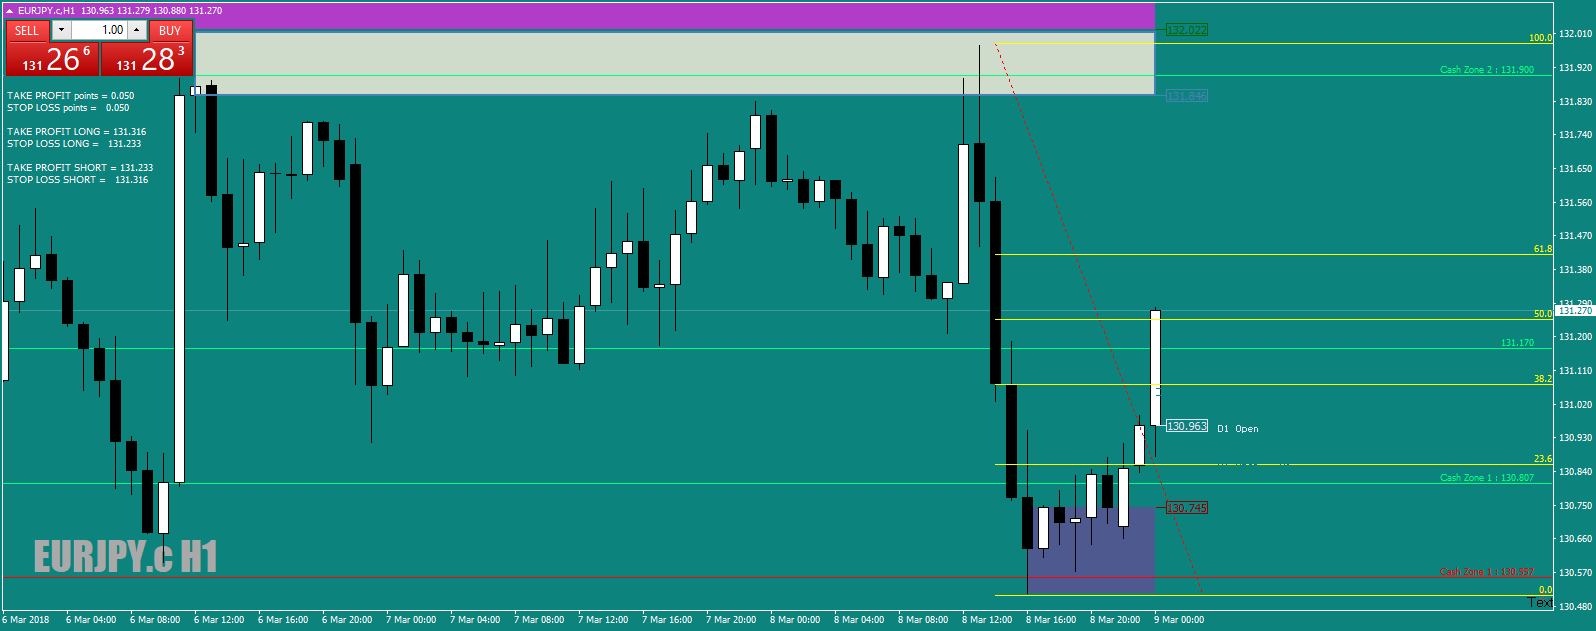 EURJPY.cH1righttothe50-close-9thMar18.png